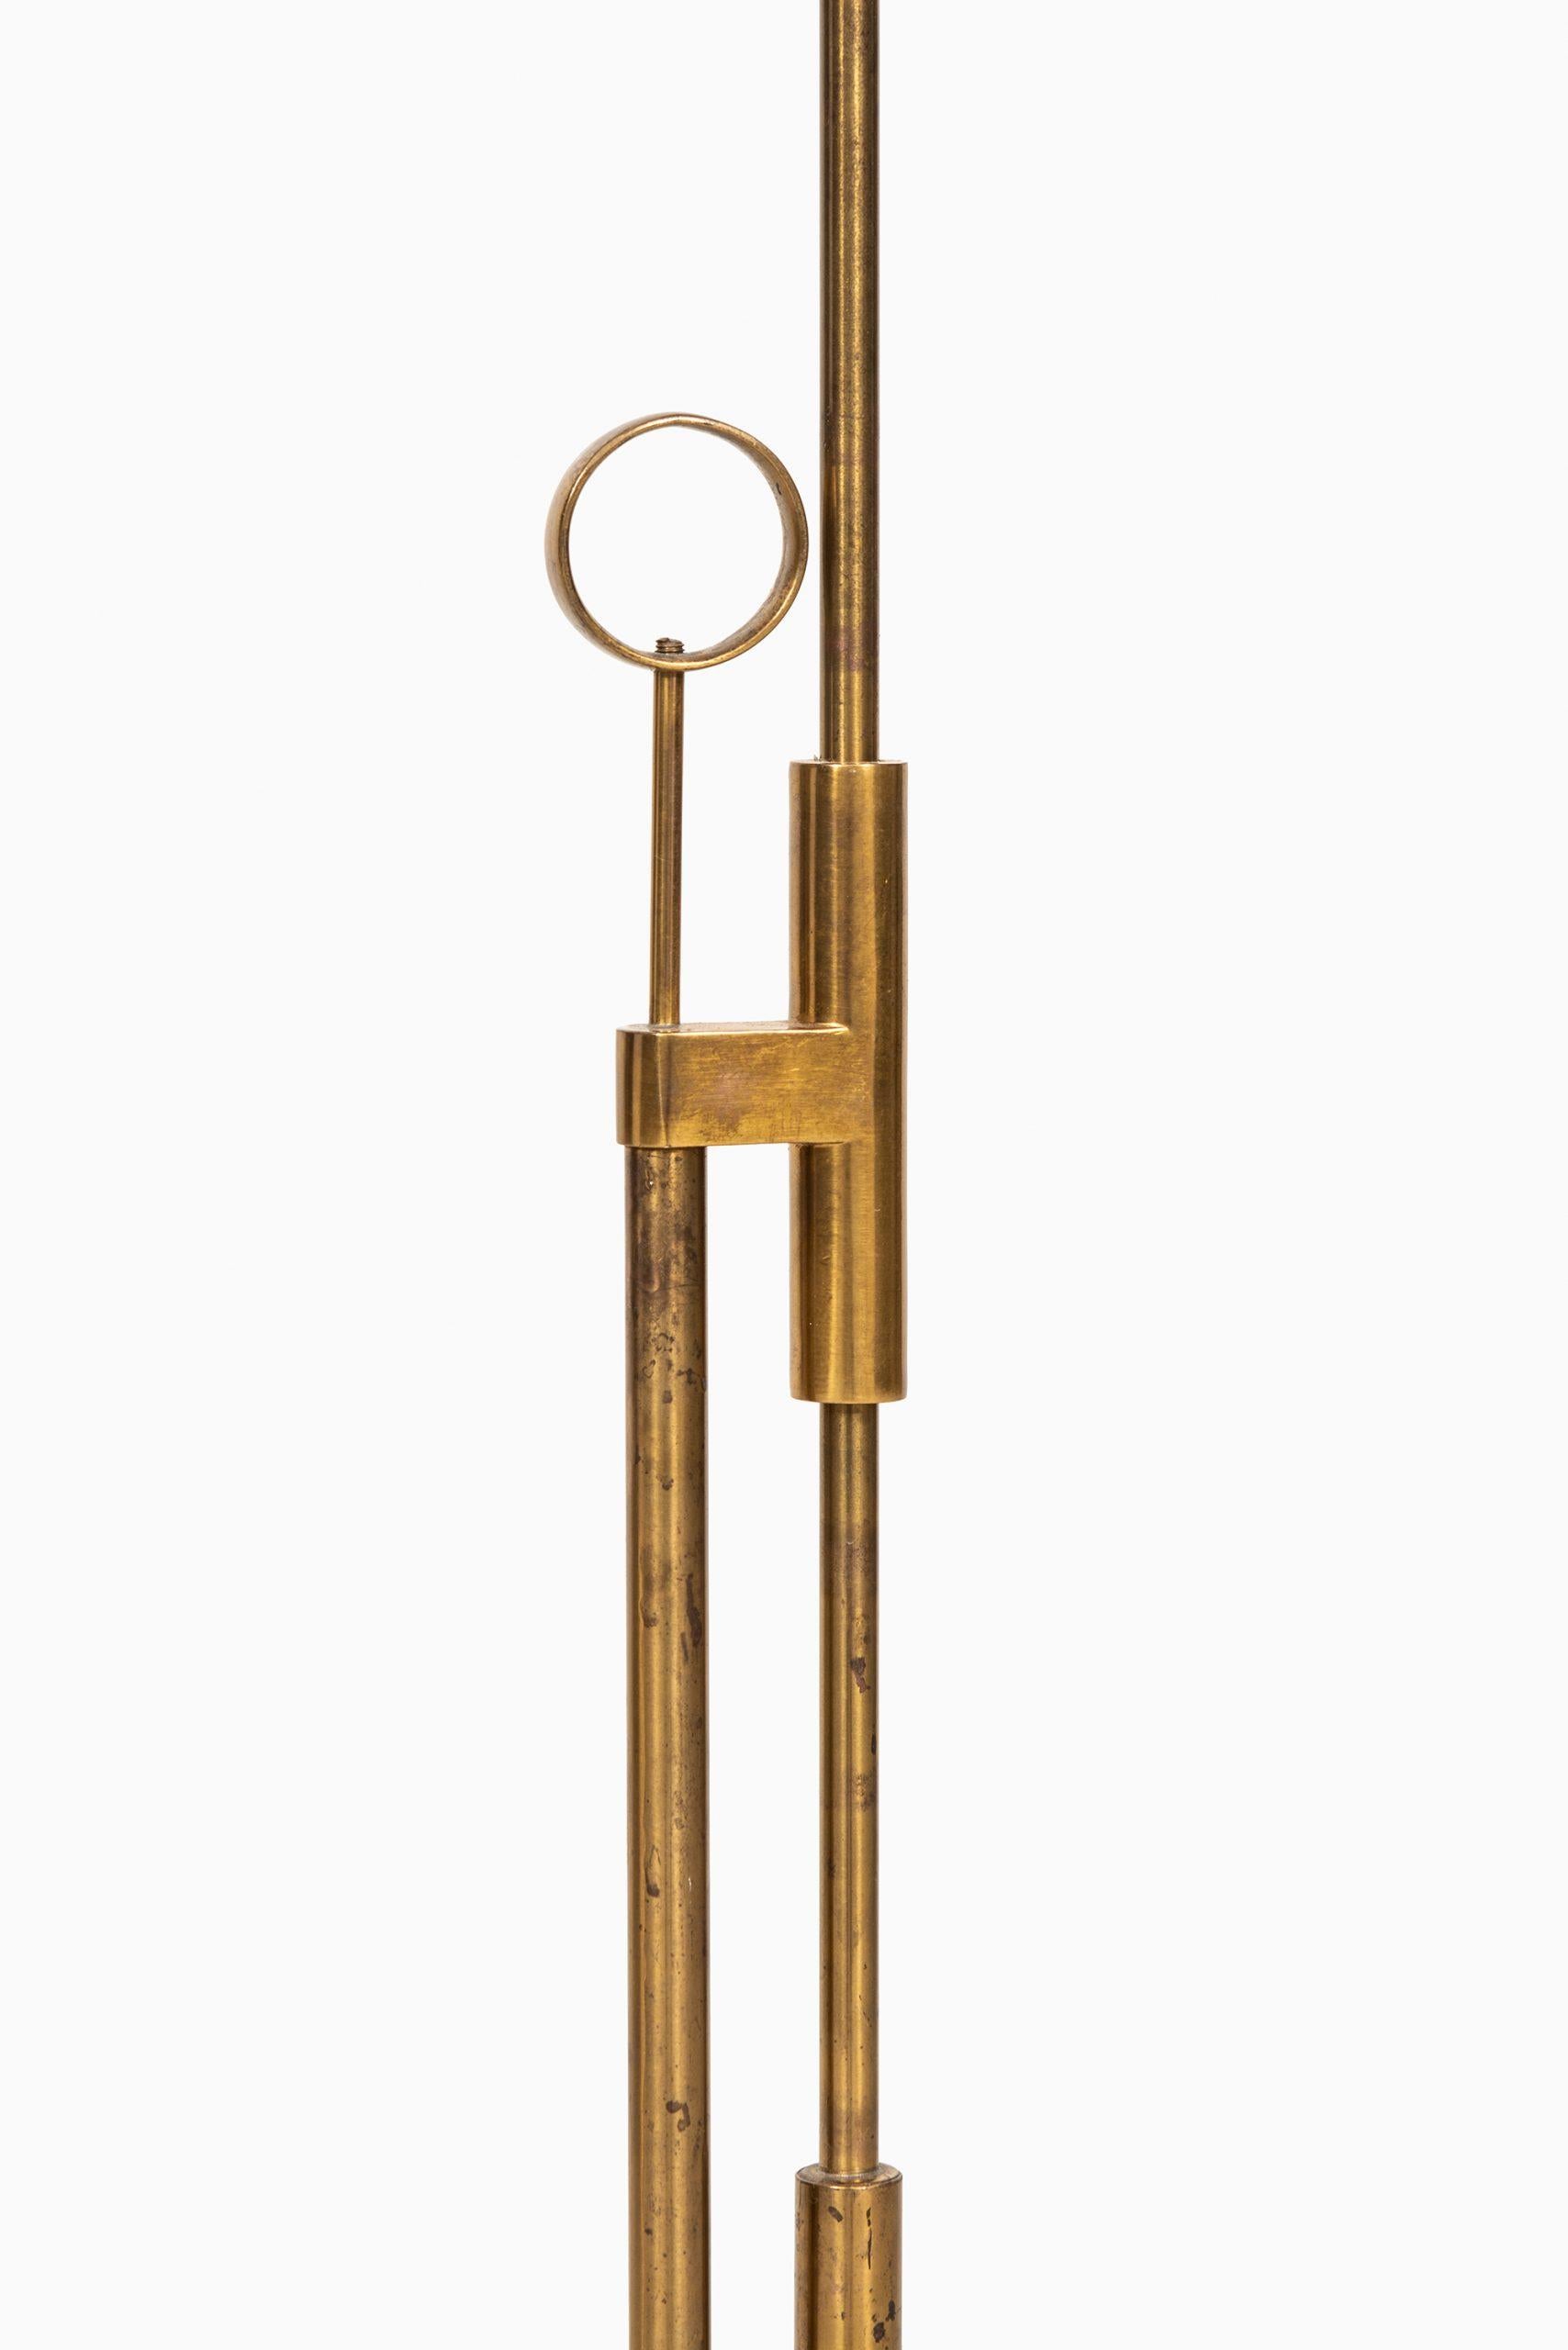 Height adjustable floor lamp. Produced by Falkenbergs Belysnings AB in Sweden.
Size: Height 80-130 cm.
Please note: This floor lamp will be sold without any lamp shade.